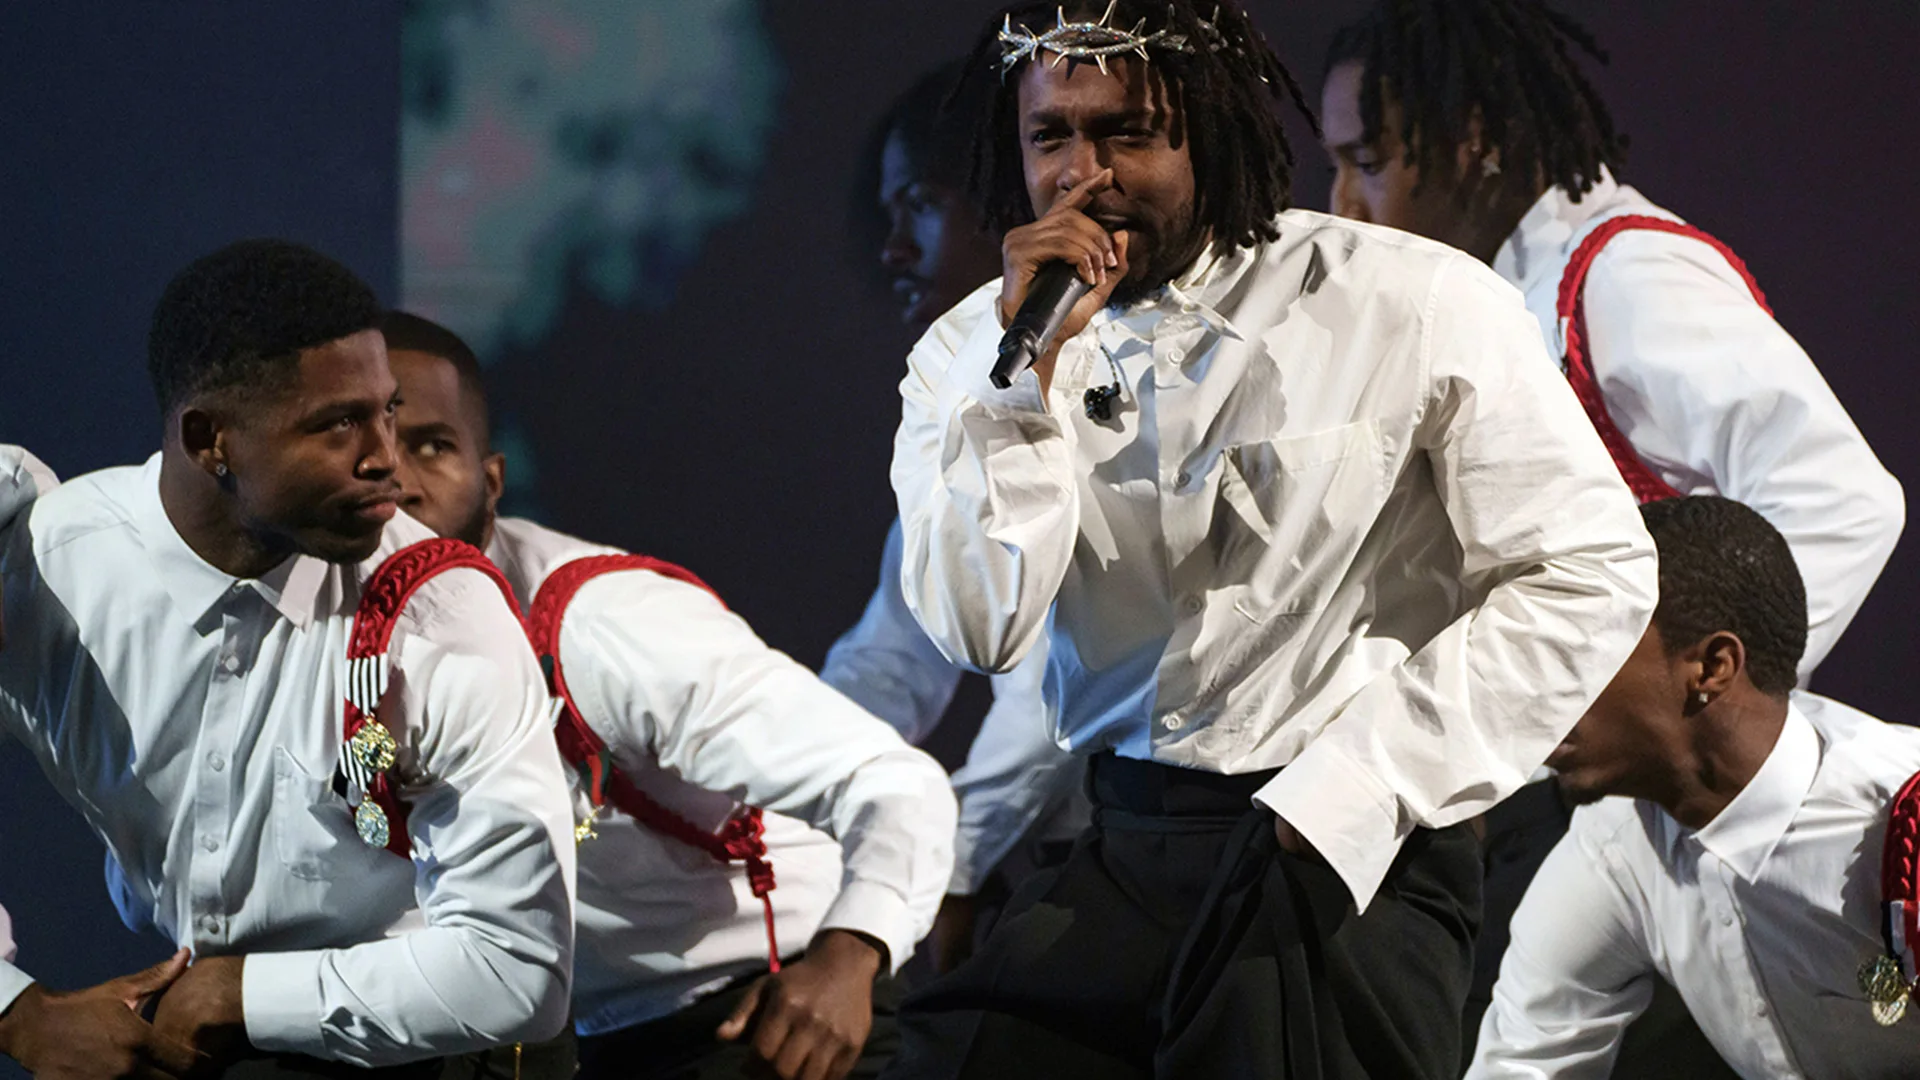 Kendrick Lamar rapping with a crown of thorns, and dancers surround him in white shirts